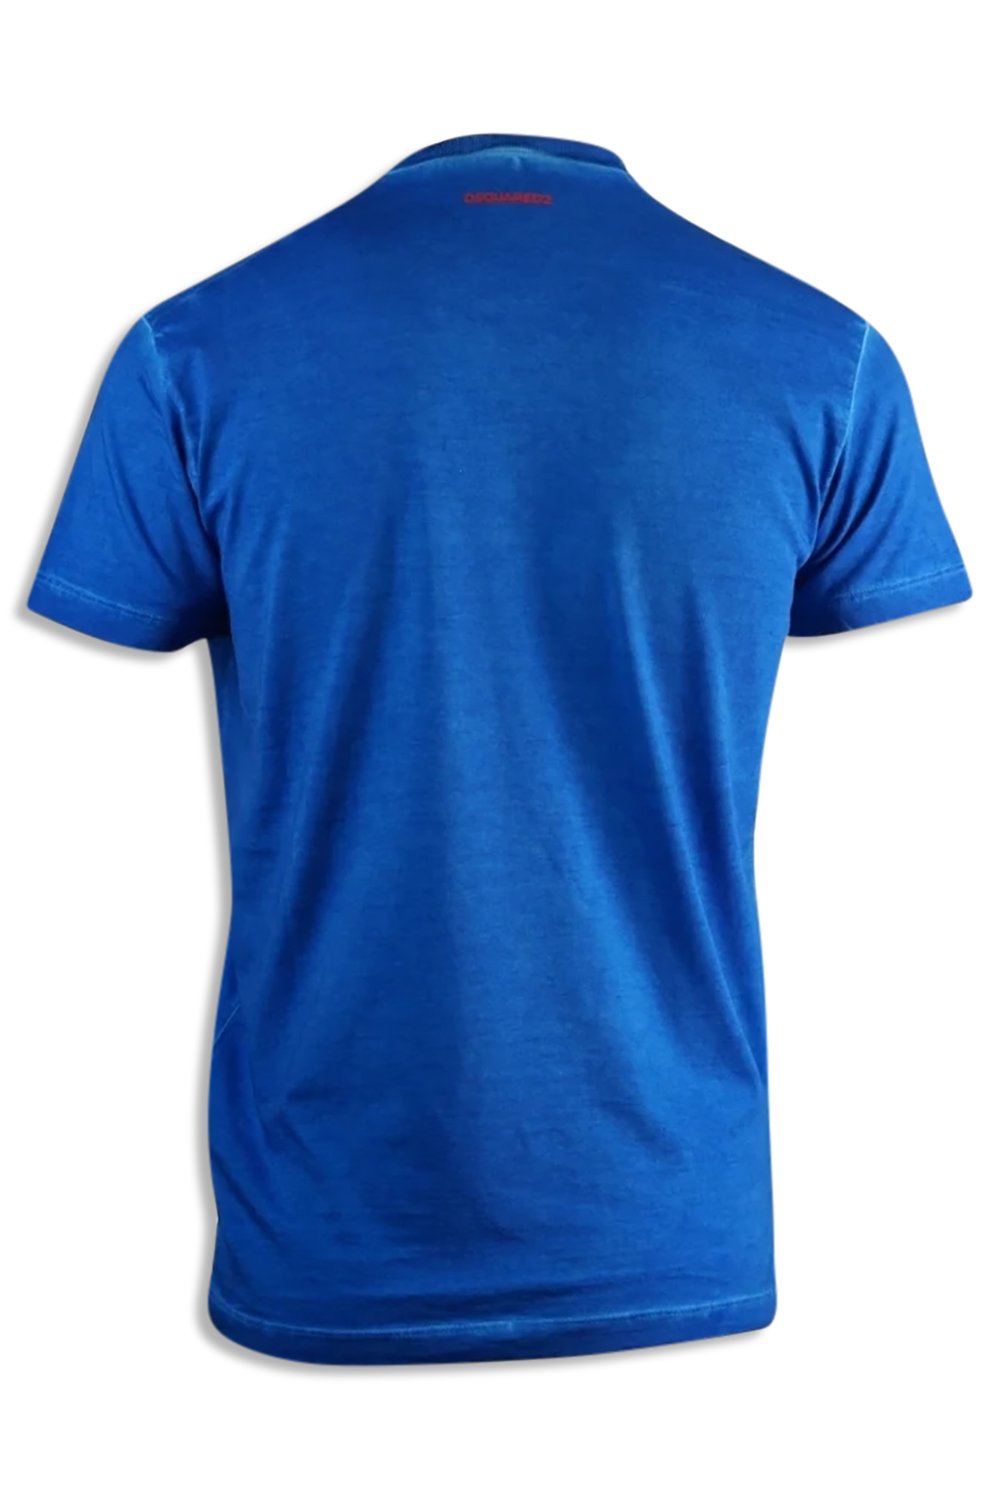 Men's Blue DSquared2 Layered Logo Cool Fit T-Shirt